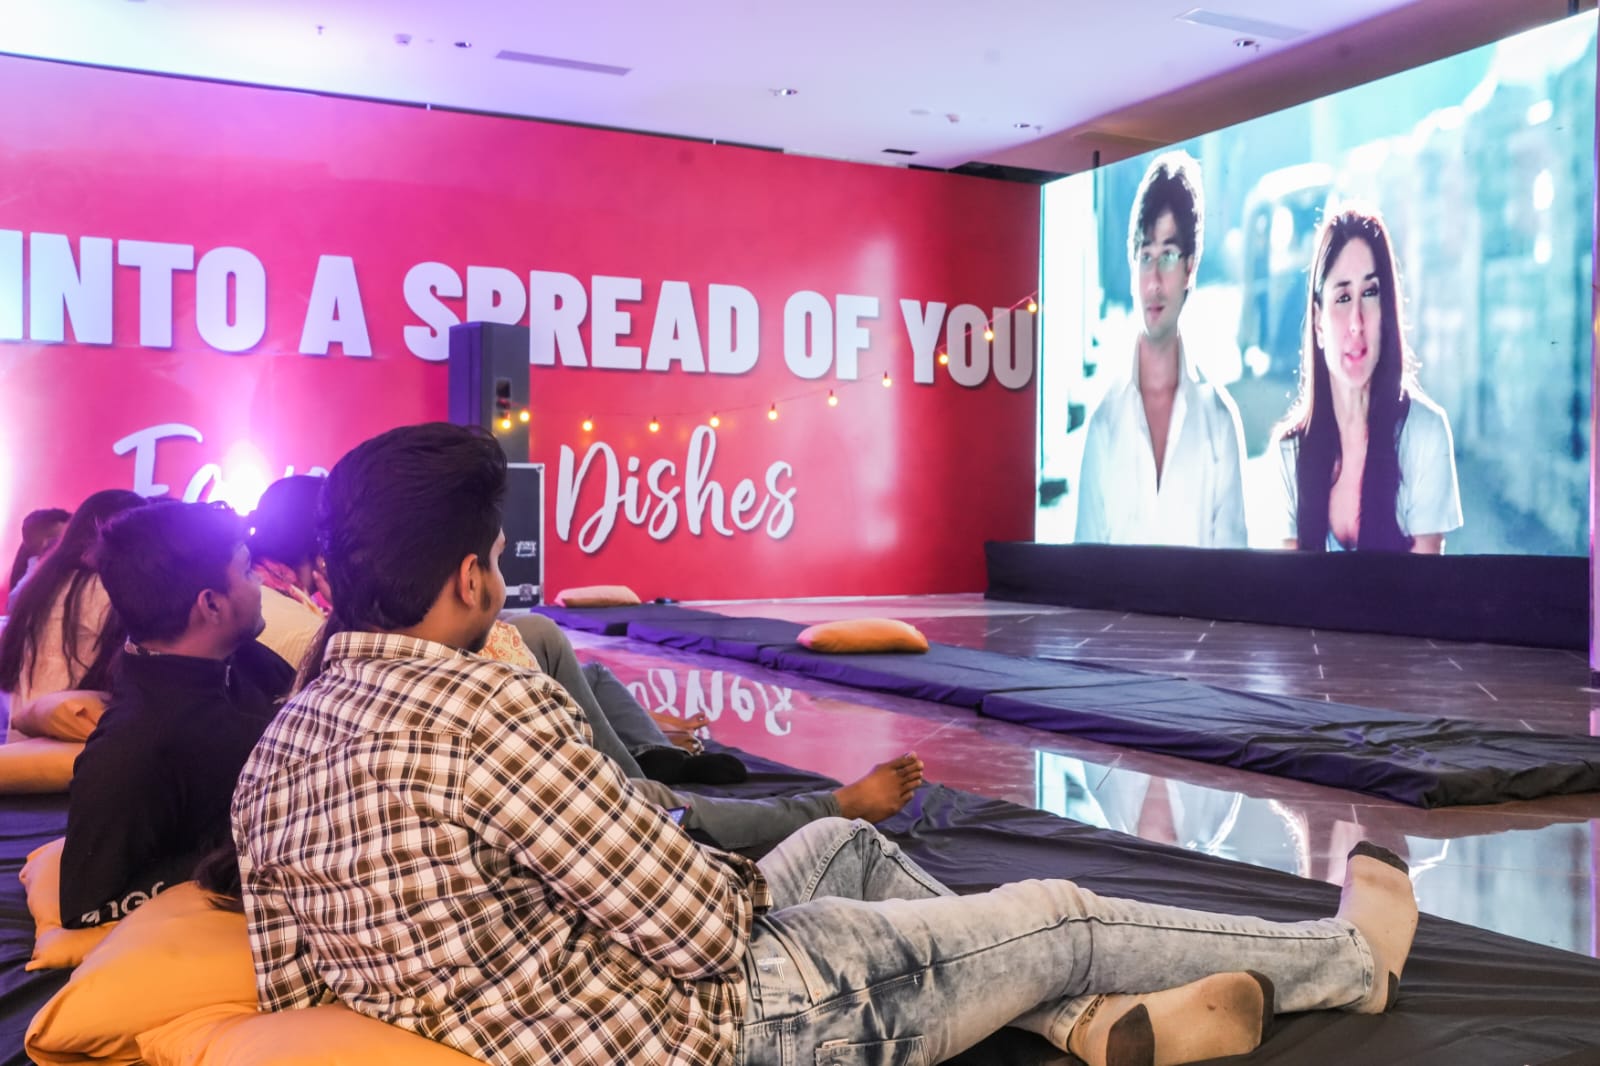 Urban Square Mall Partners with Sunset Cinema Club for Avid Movie-Watchers